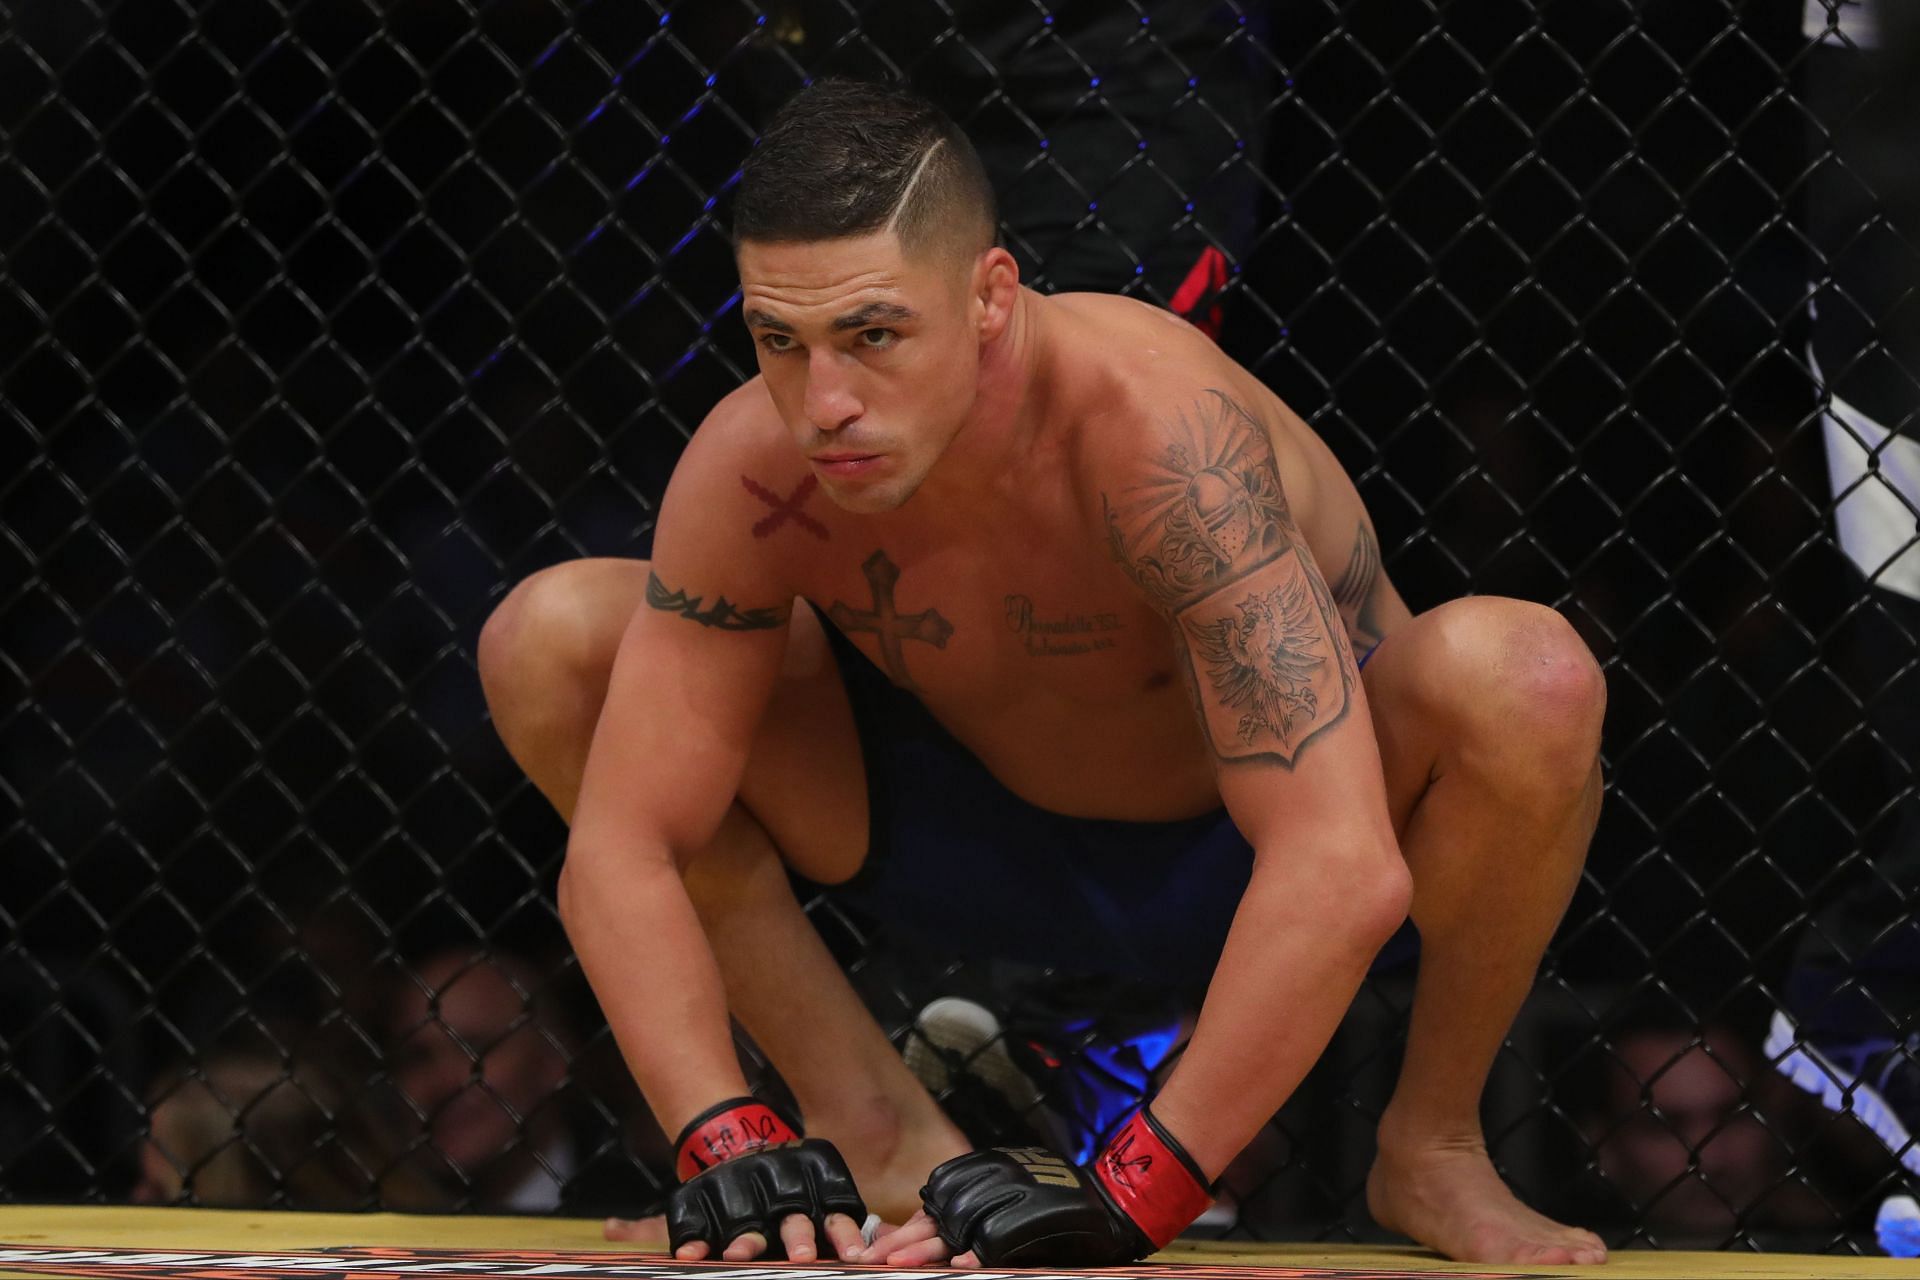 Diego Sanchez absorbed an inhuman amount of punishment during his career